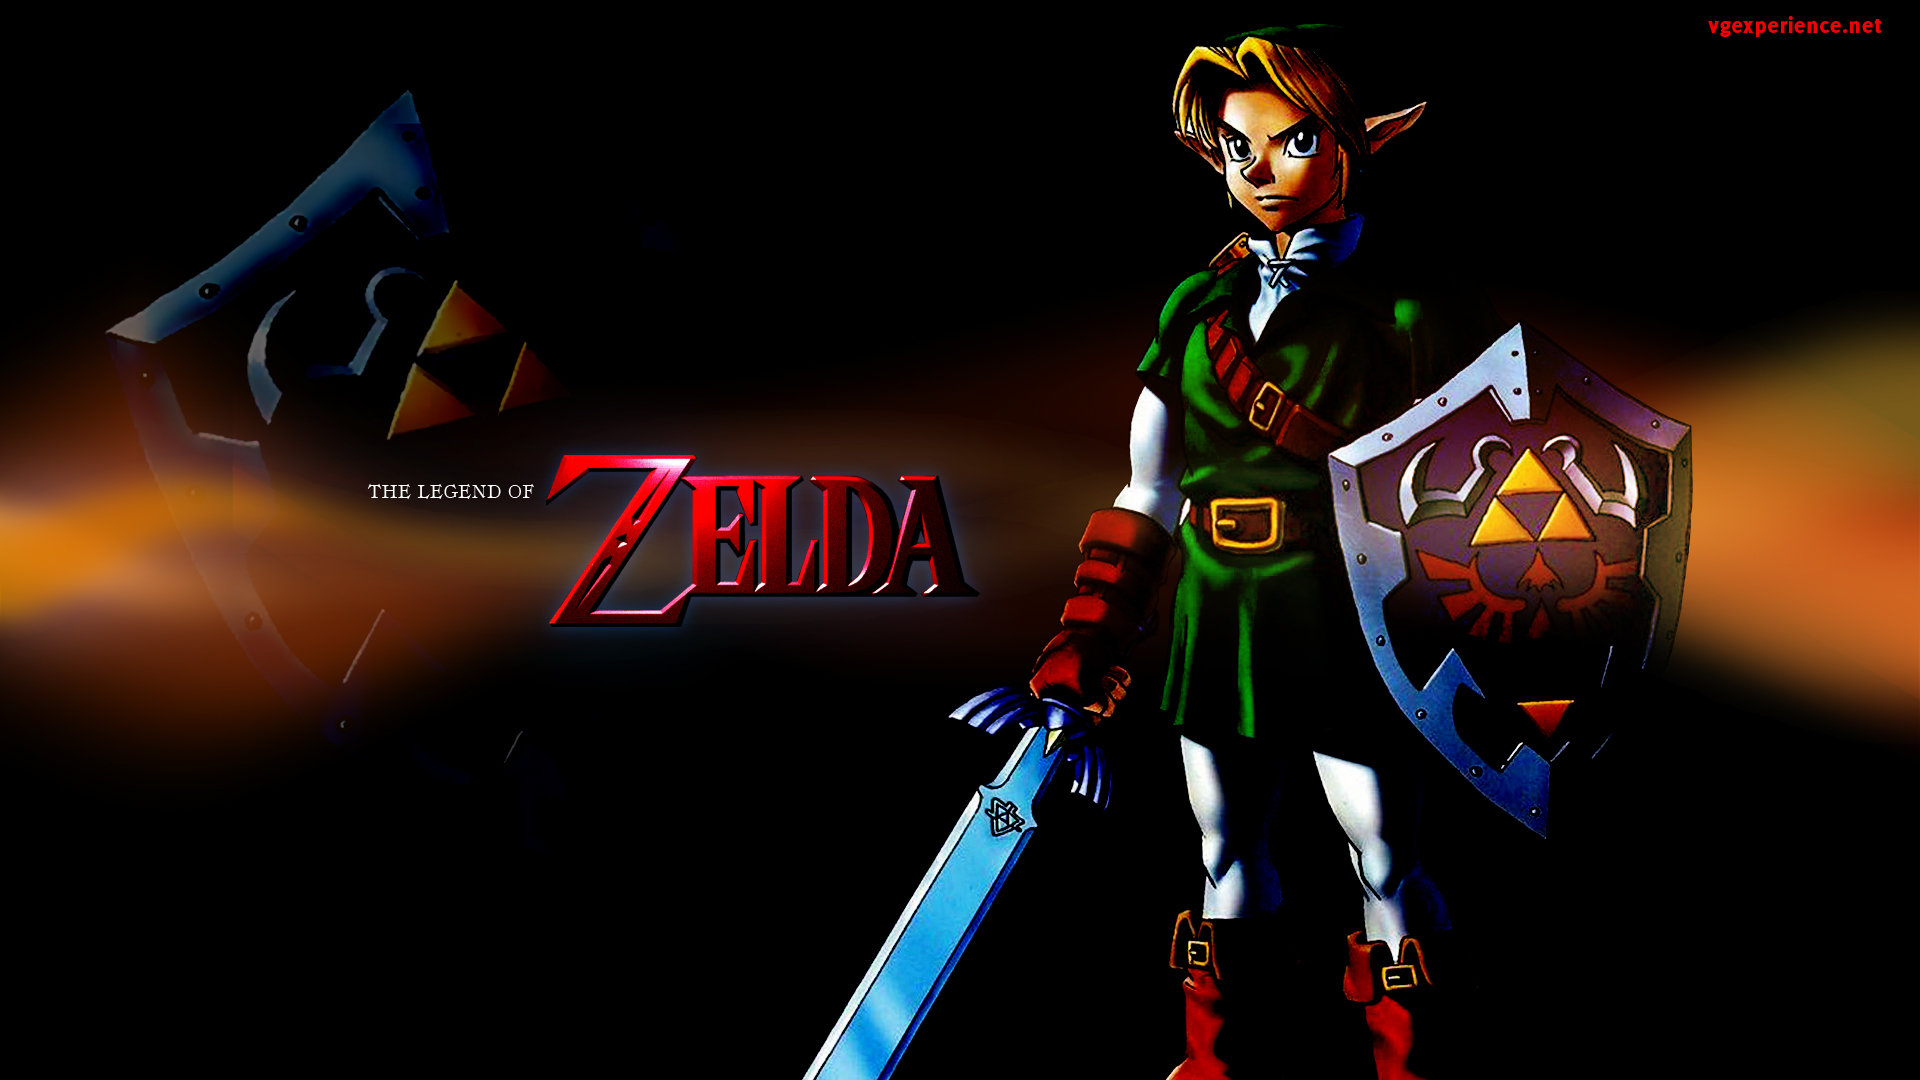 High resolution The Legend Of Zelda: Ocarina Of Time full hd 1920x1080 background ID:151645 for desktop